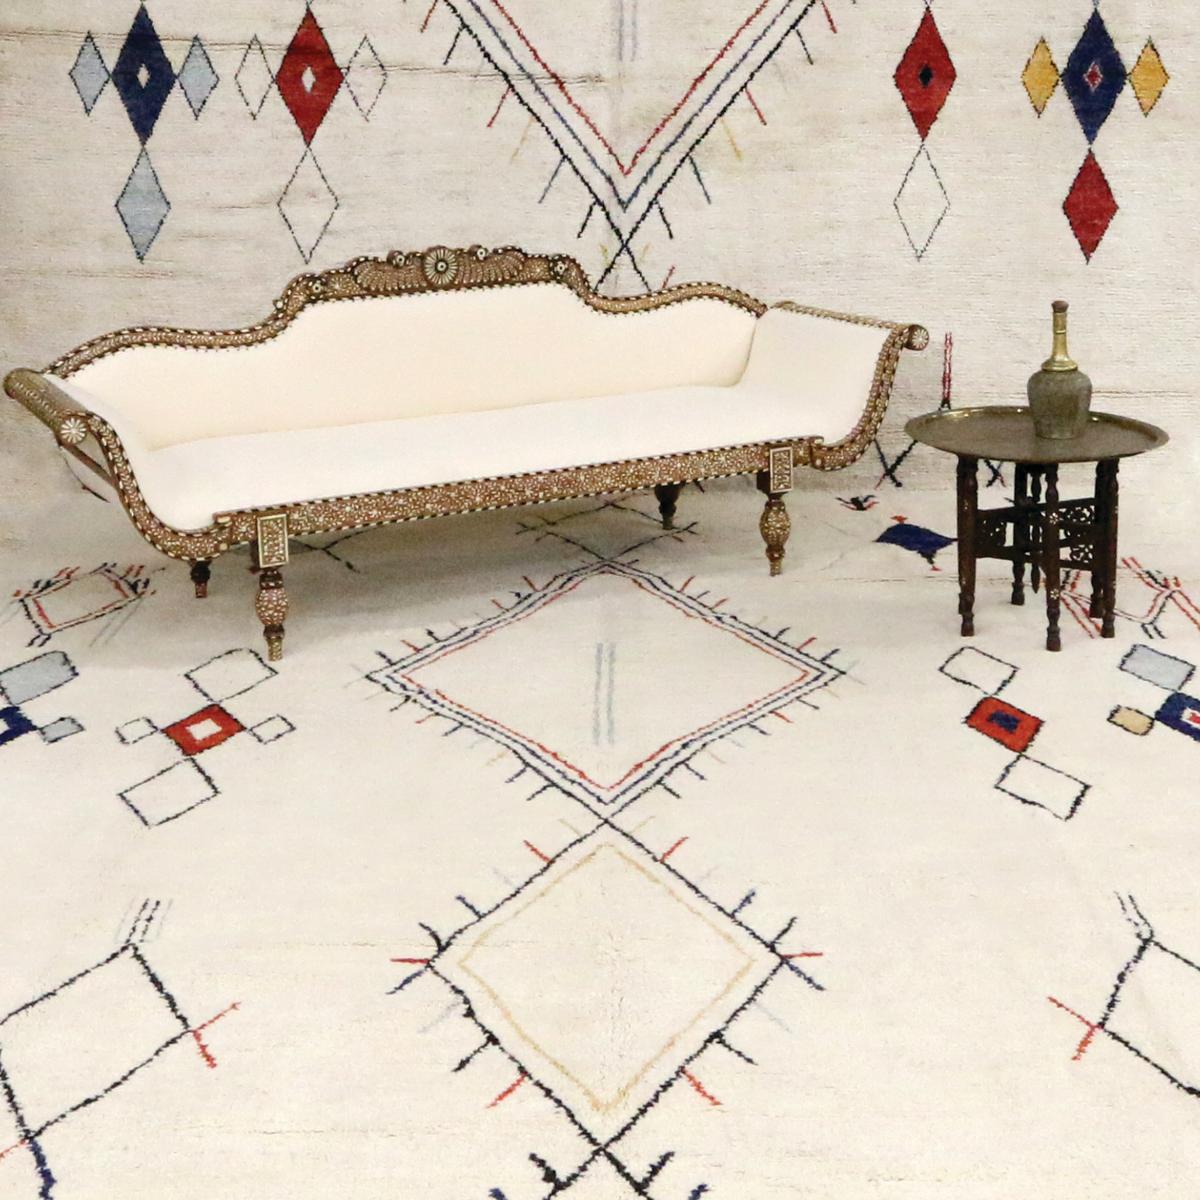 80288 Contemporary Moroccan Style Area Rug with Modern Tribal Lodge Style 10'04 x 13'02. This is a beautiful example of a contemporary Moroccan style area rug with Modern tribal design, woven with a clean and simple, yet sophisticated composition.